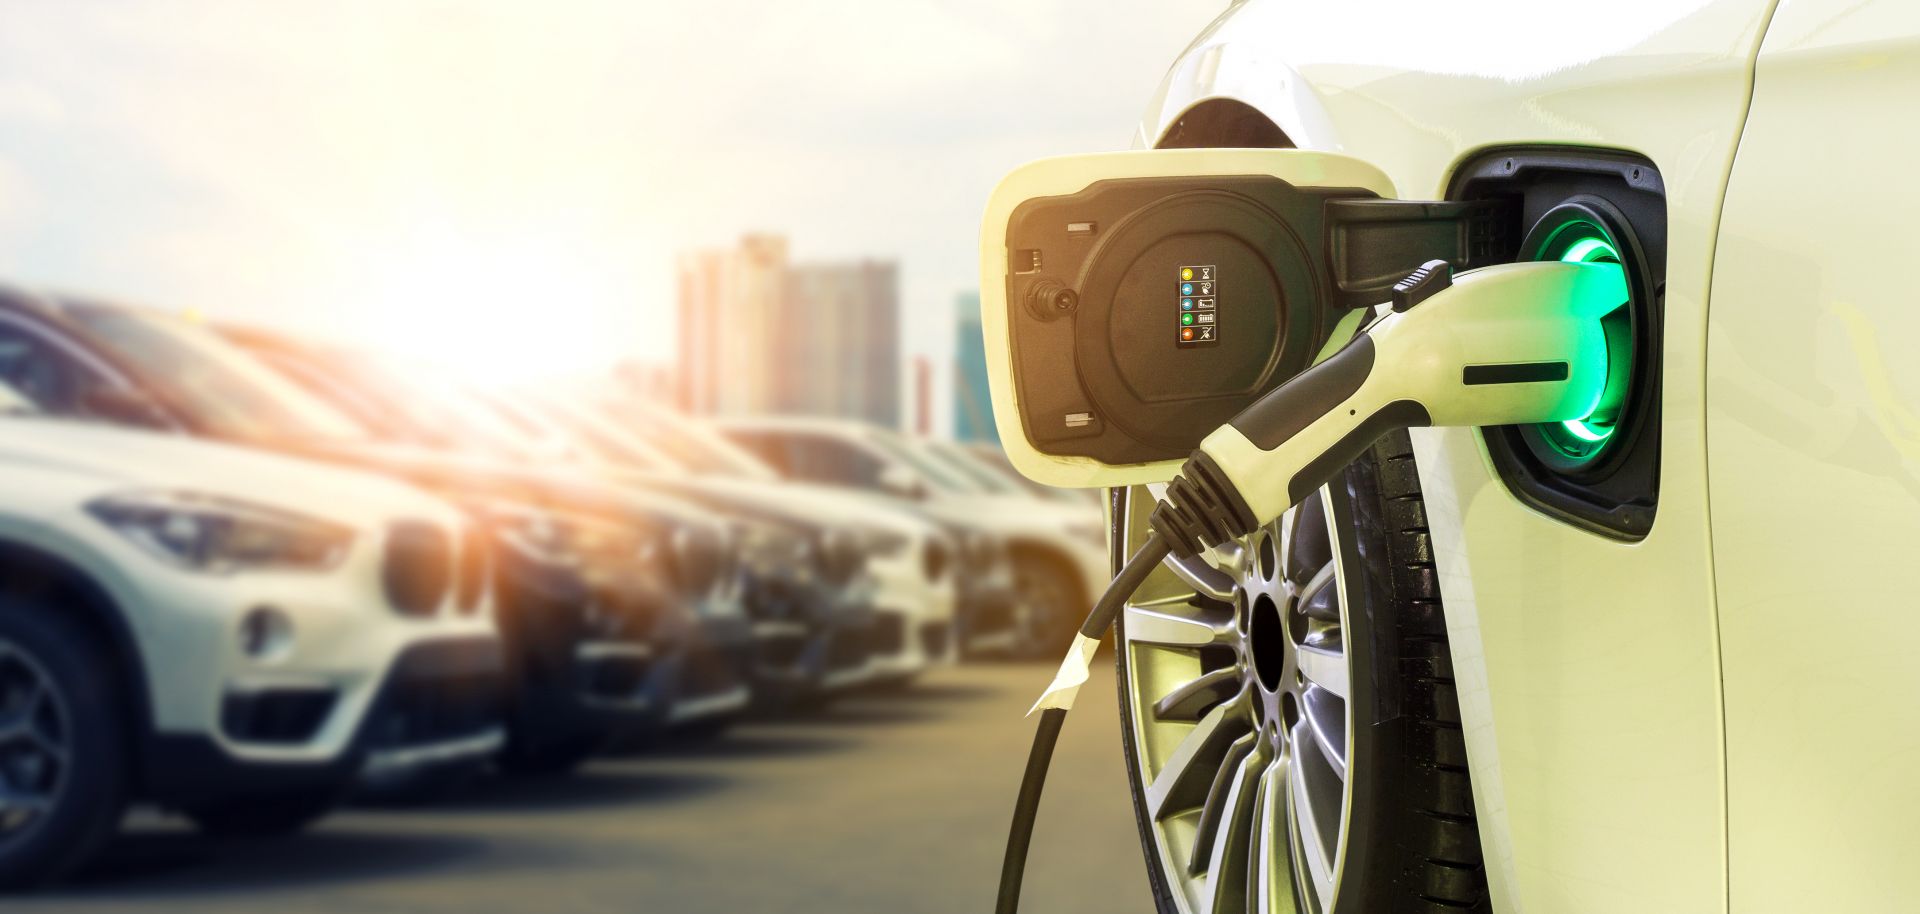 Electric vehicles make up only a small portion of total vehicle sales today, but demand for them is steadily growing.